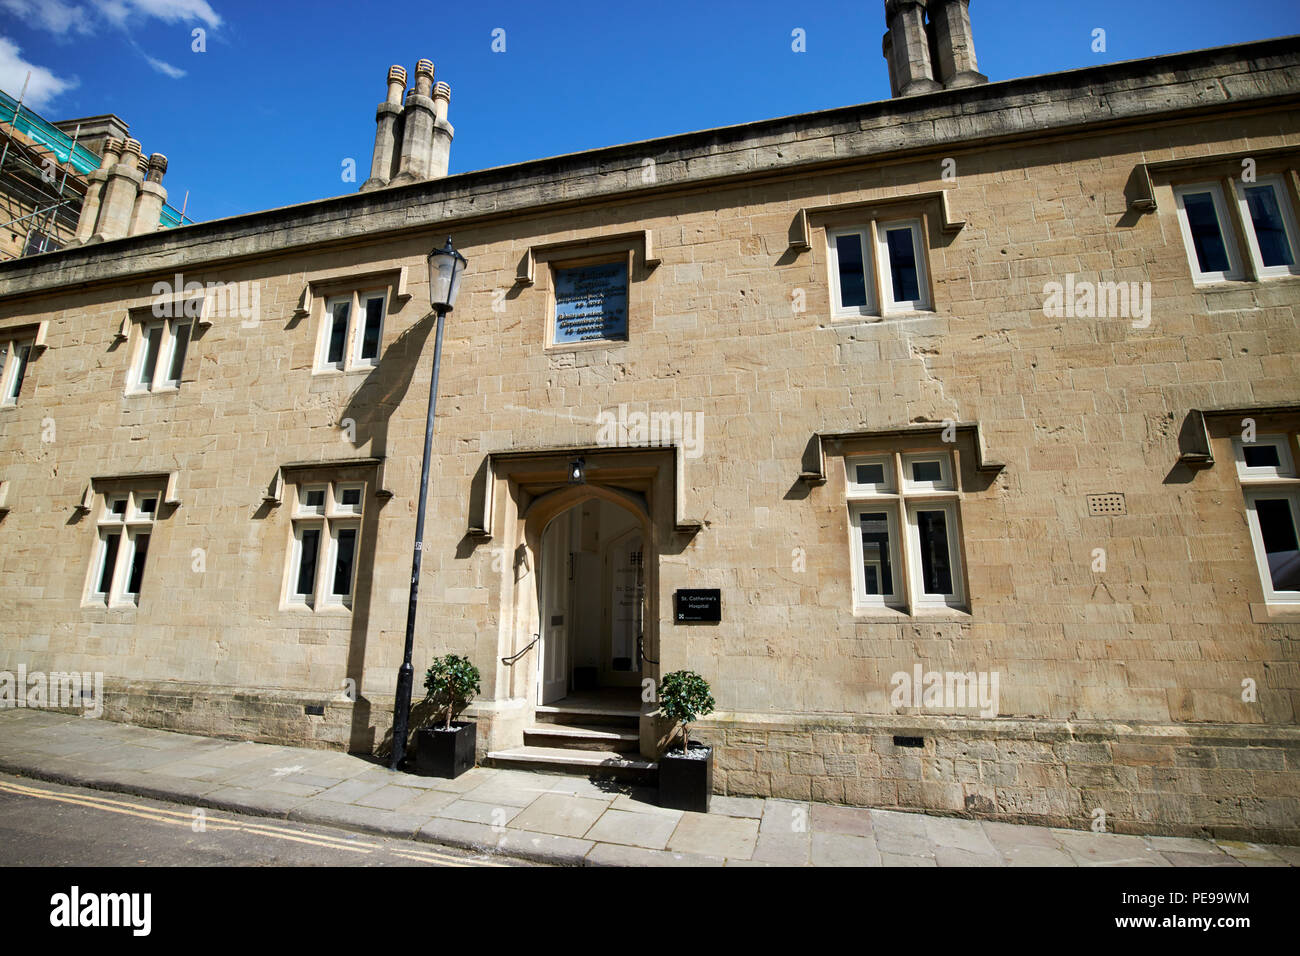 former st catherines hospital building now boutique serviced apartments Bath England UK Stock Photo